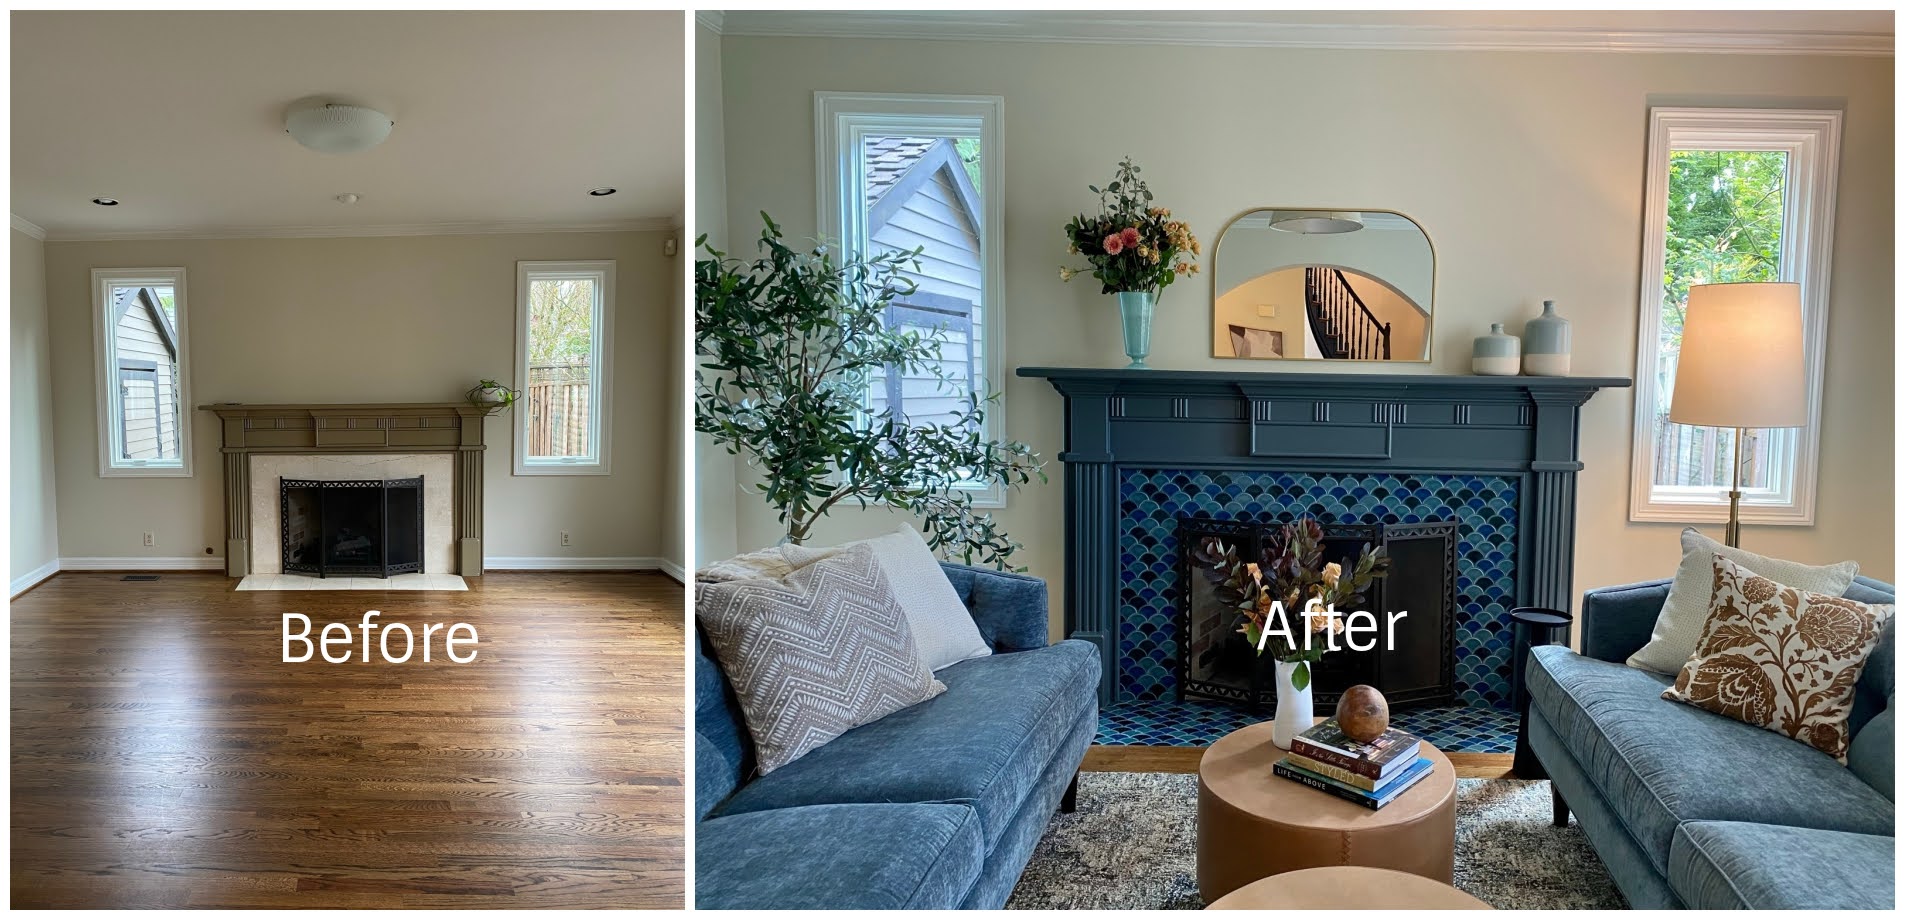 Before and after photos of an indoor living room with a fireplace.